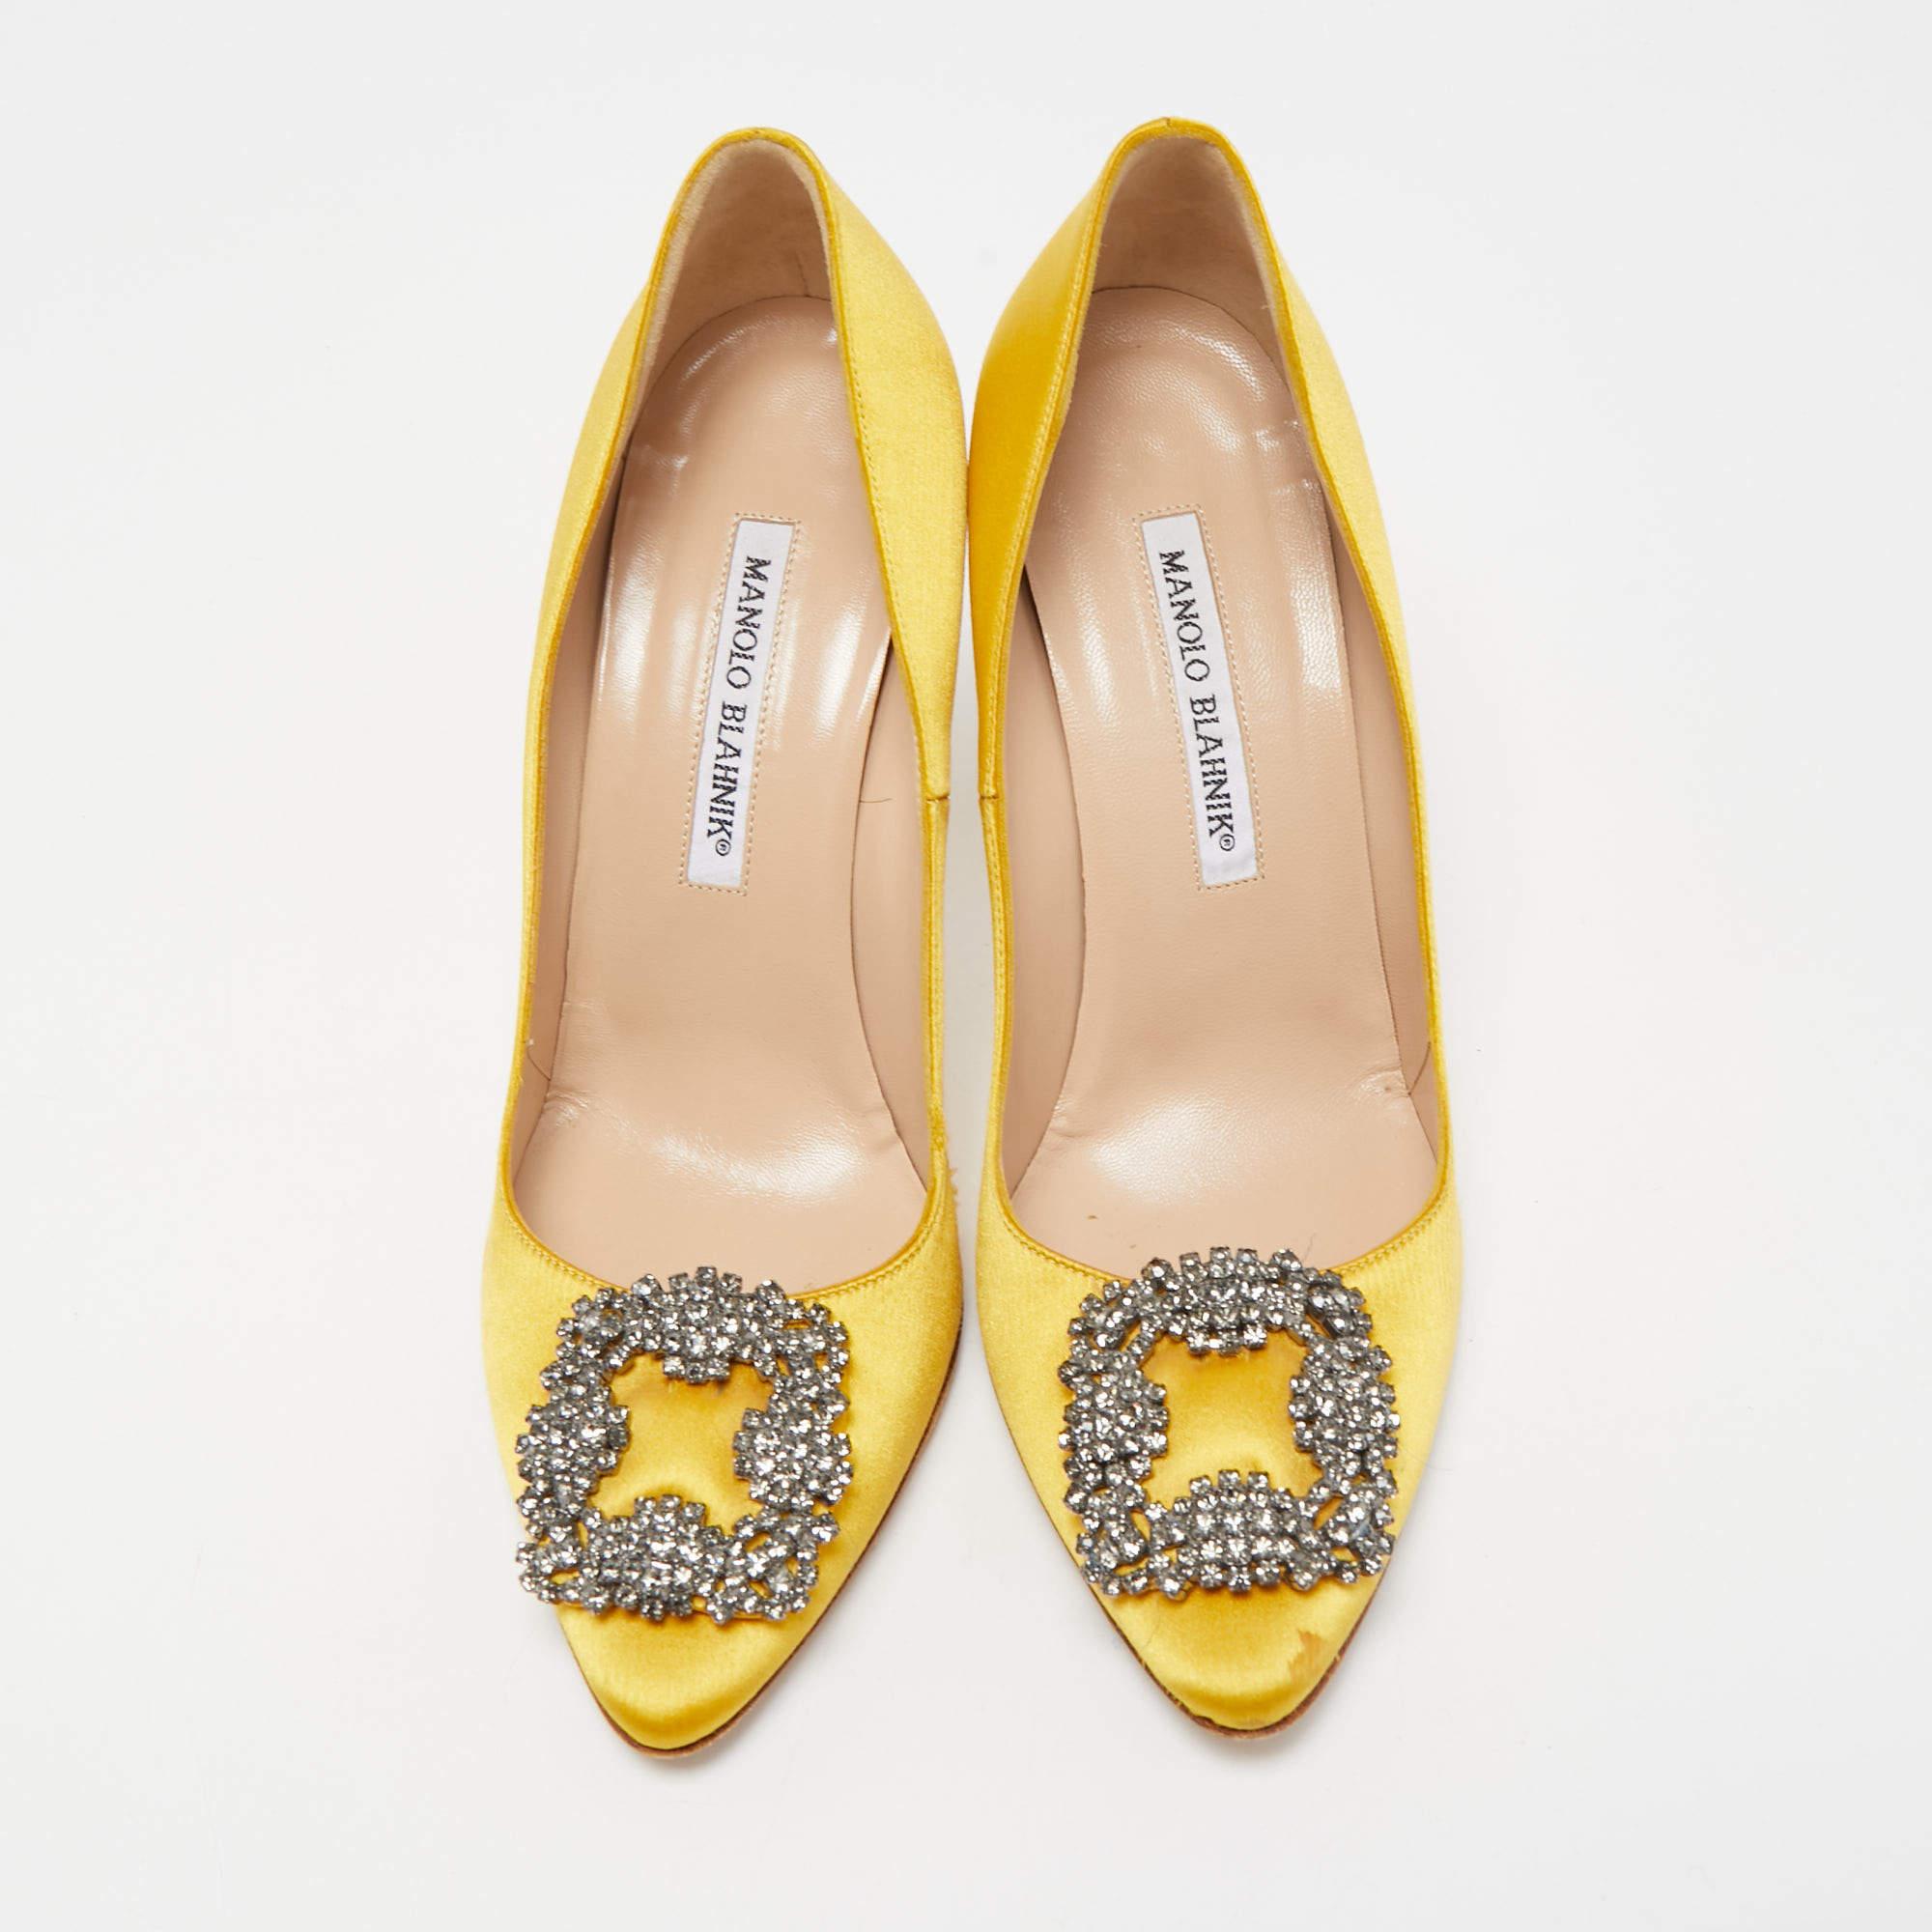 Perfectly sewn and finished to ensure an elegant look and fit, these yellow Hangisi shoes are a purchase you'll love flaunting. They look great on the feet.

Includes: Original Dustbag
